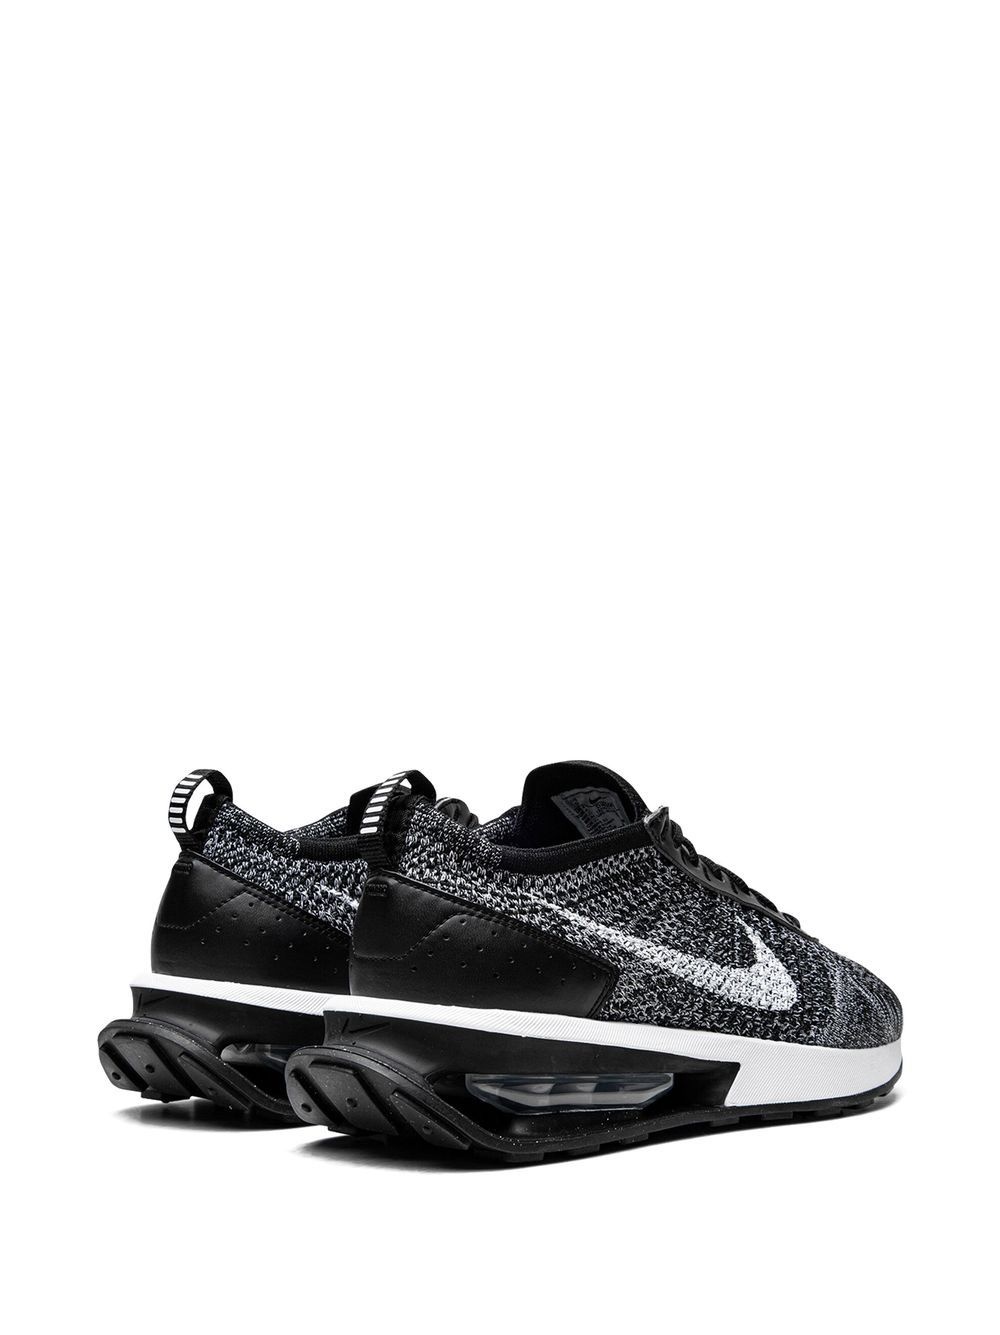 Air Max Flyknit Racer "Oreo" sneakers - 3